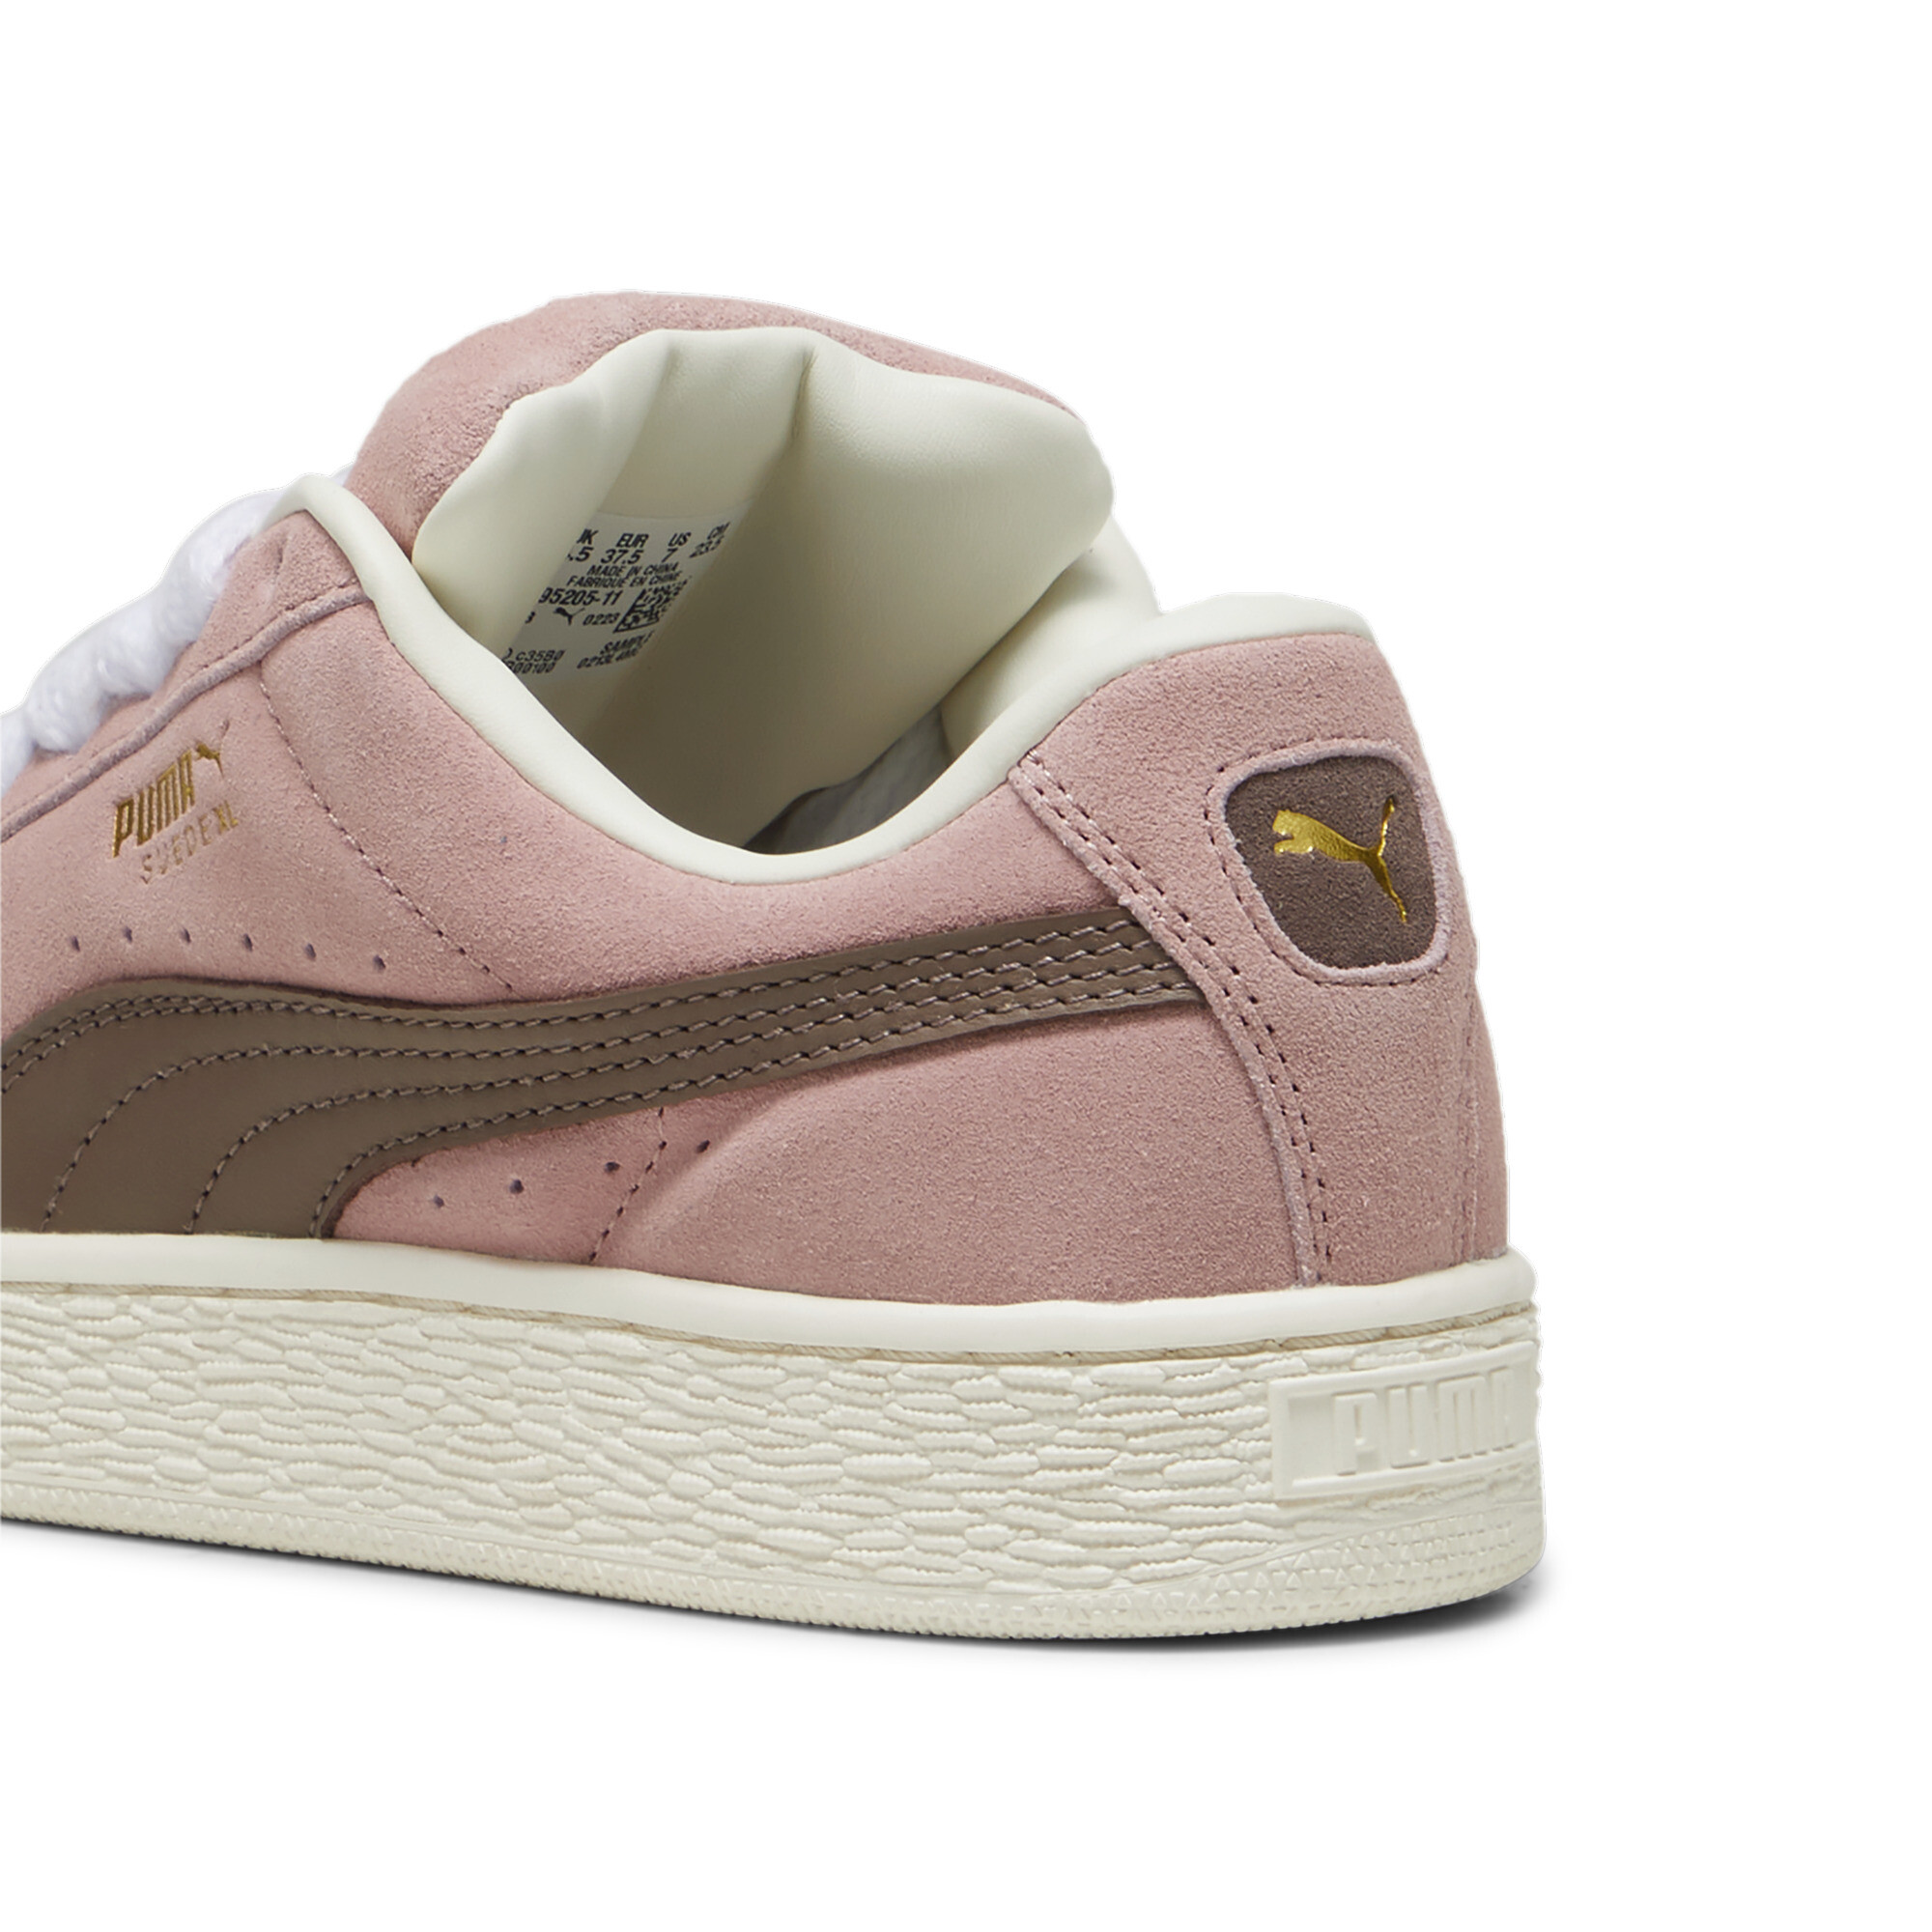 Puma Suede XL Sneakers Unisex, Pink, Size 44, Shoes